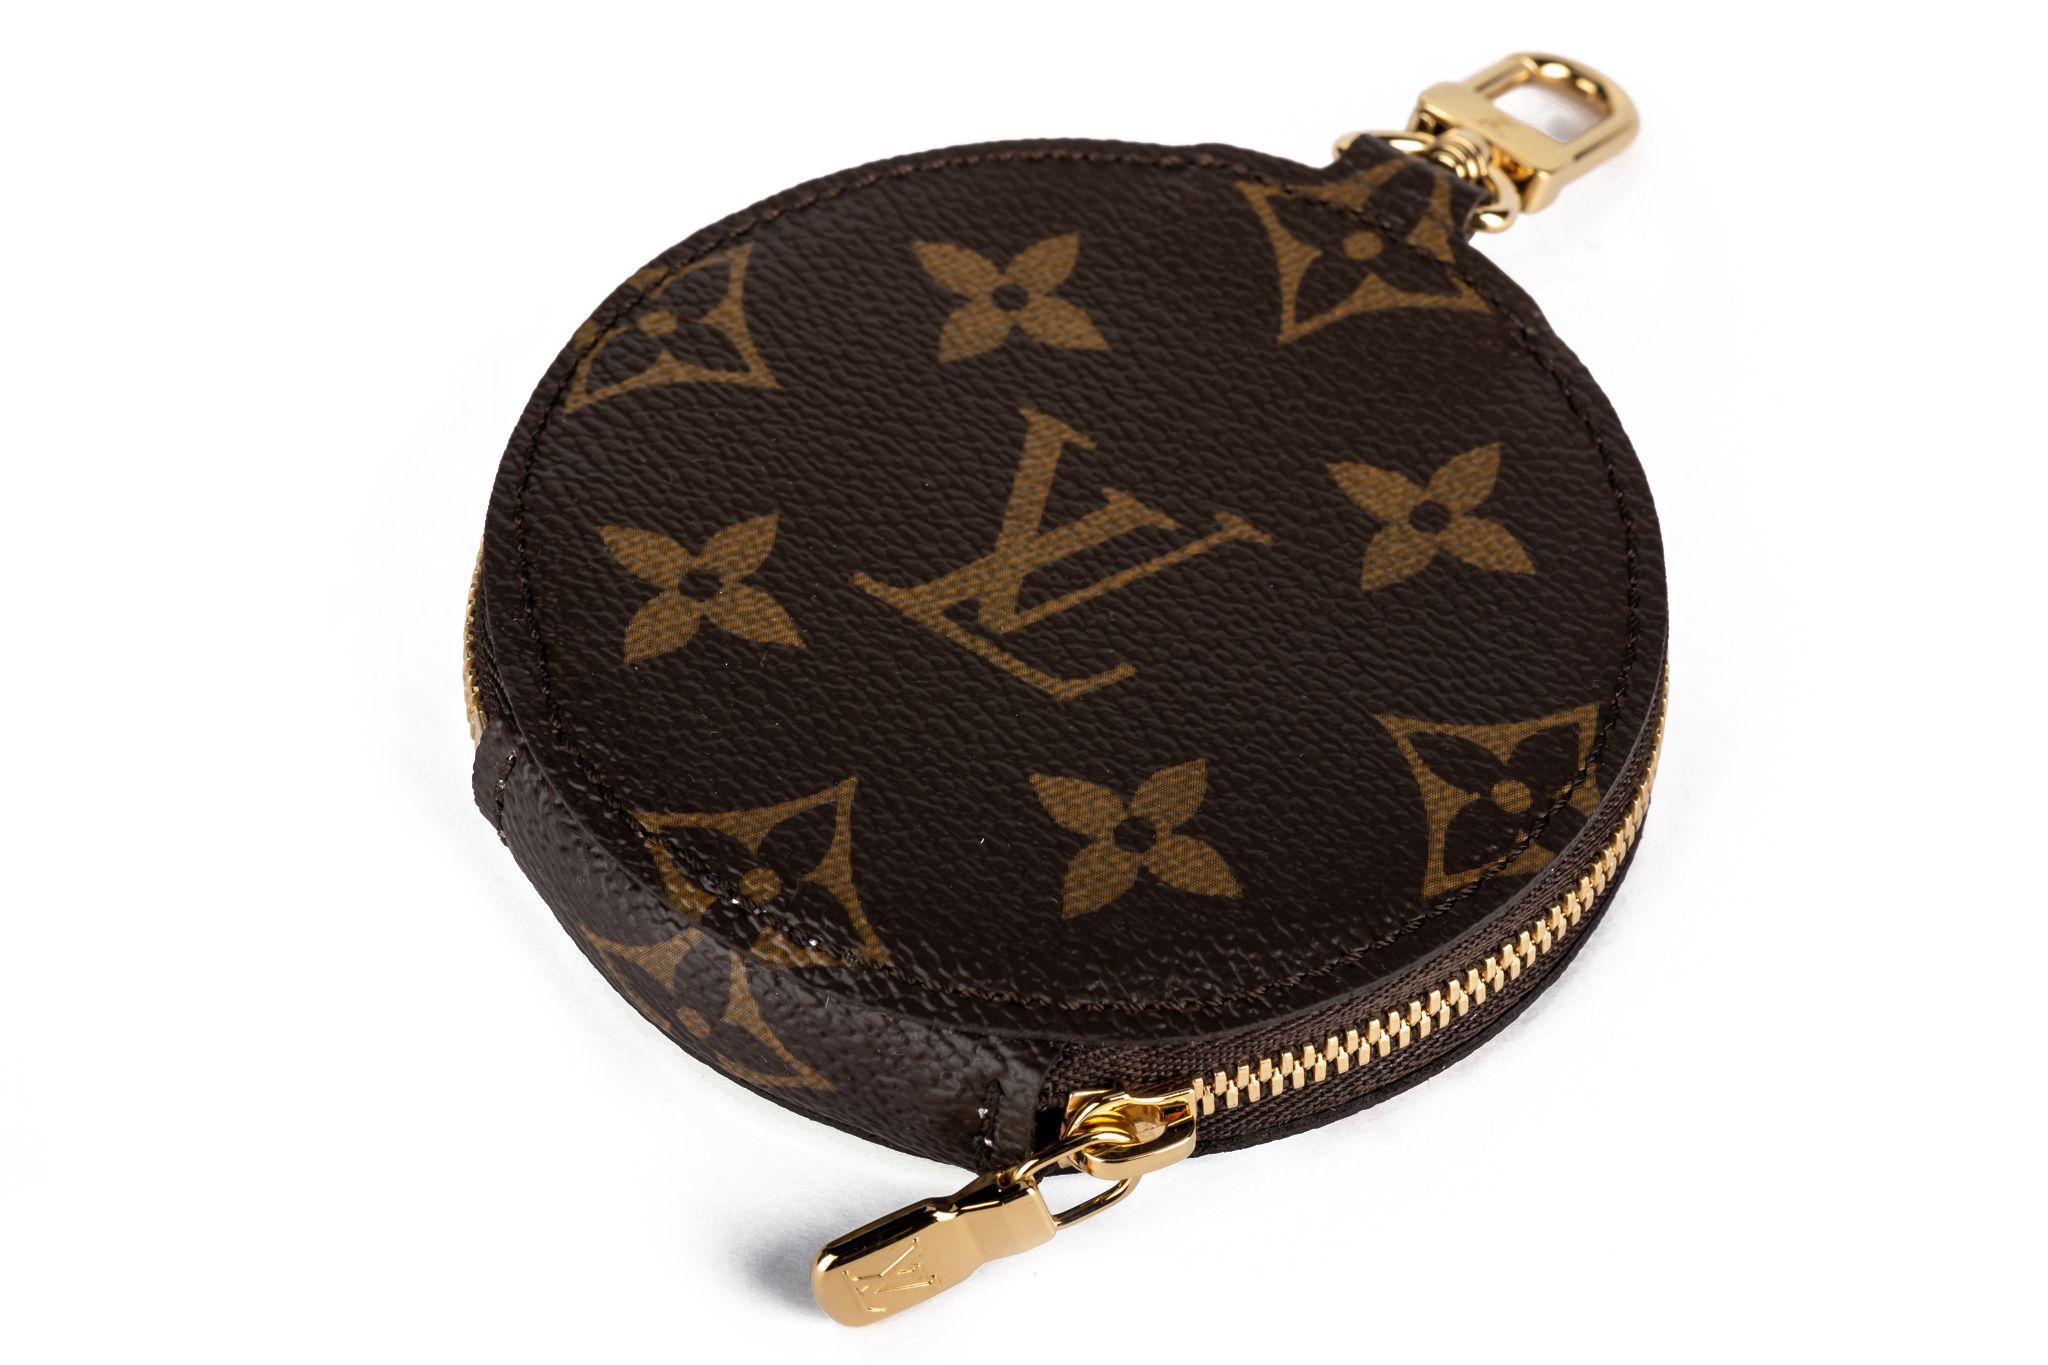 This Louis Vuitton Monogram 2021 Christmas Animation Japanese Garden round coin purse is a disk of Louis Vuitton monogram coated canvas. This wallet features features a playful and colorful design of a Japanese Garden printed onto the traditional